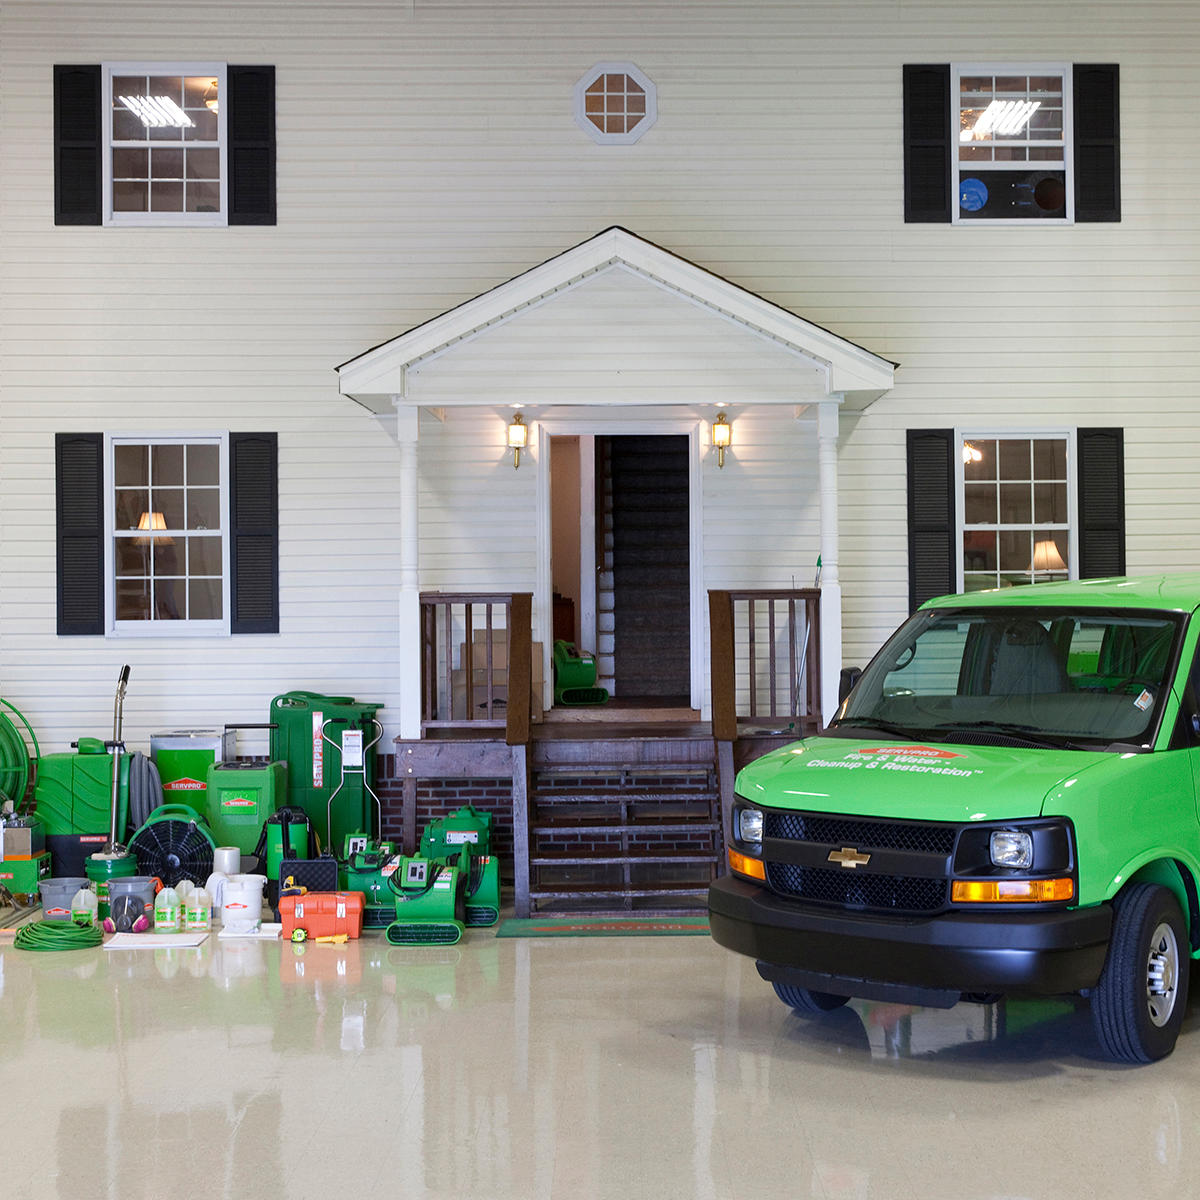 SERVPRO of South Durham and Orange County has been a trusted leader in the restoration industry since 2000 and we have highly trained technicians that are dedicated to responding faster to any disaster no matter the size, residential or commercial. As a locally owned and operated business we are dedicated to serving our neighbors and providing 24-hour emergency service any day of the week. All our technicians are highly trained, equipped with an extensive variety of advanced tools and equipment and have experience to deal with the various disasters and to manage your restoration and cleaning.